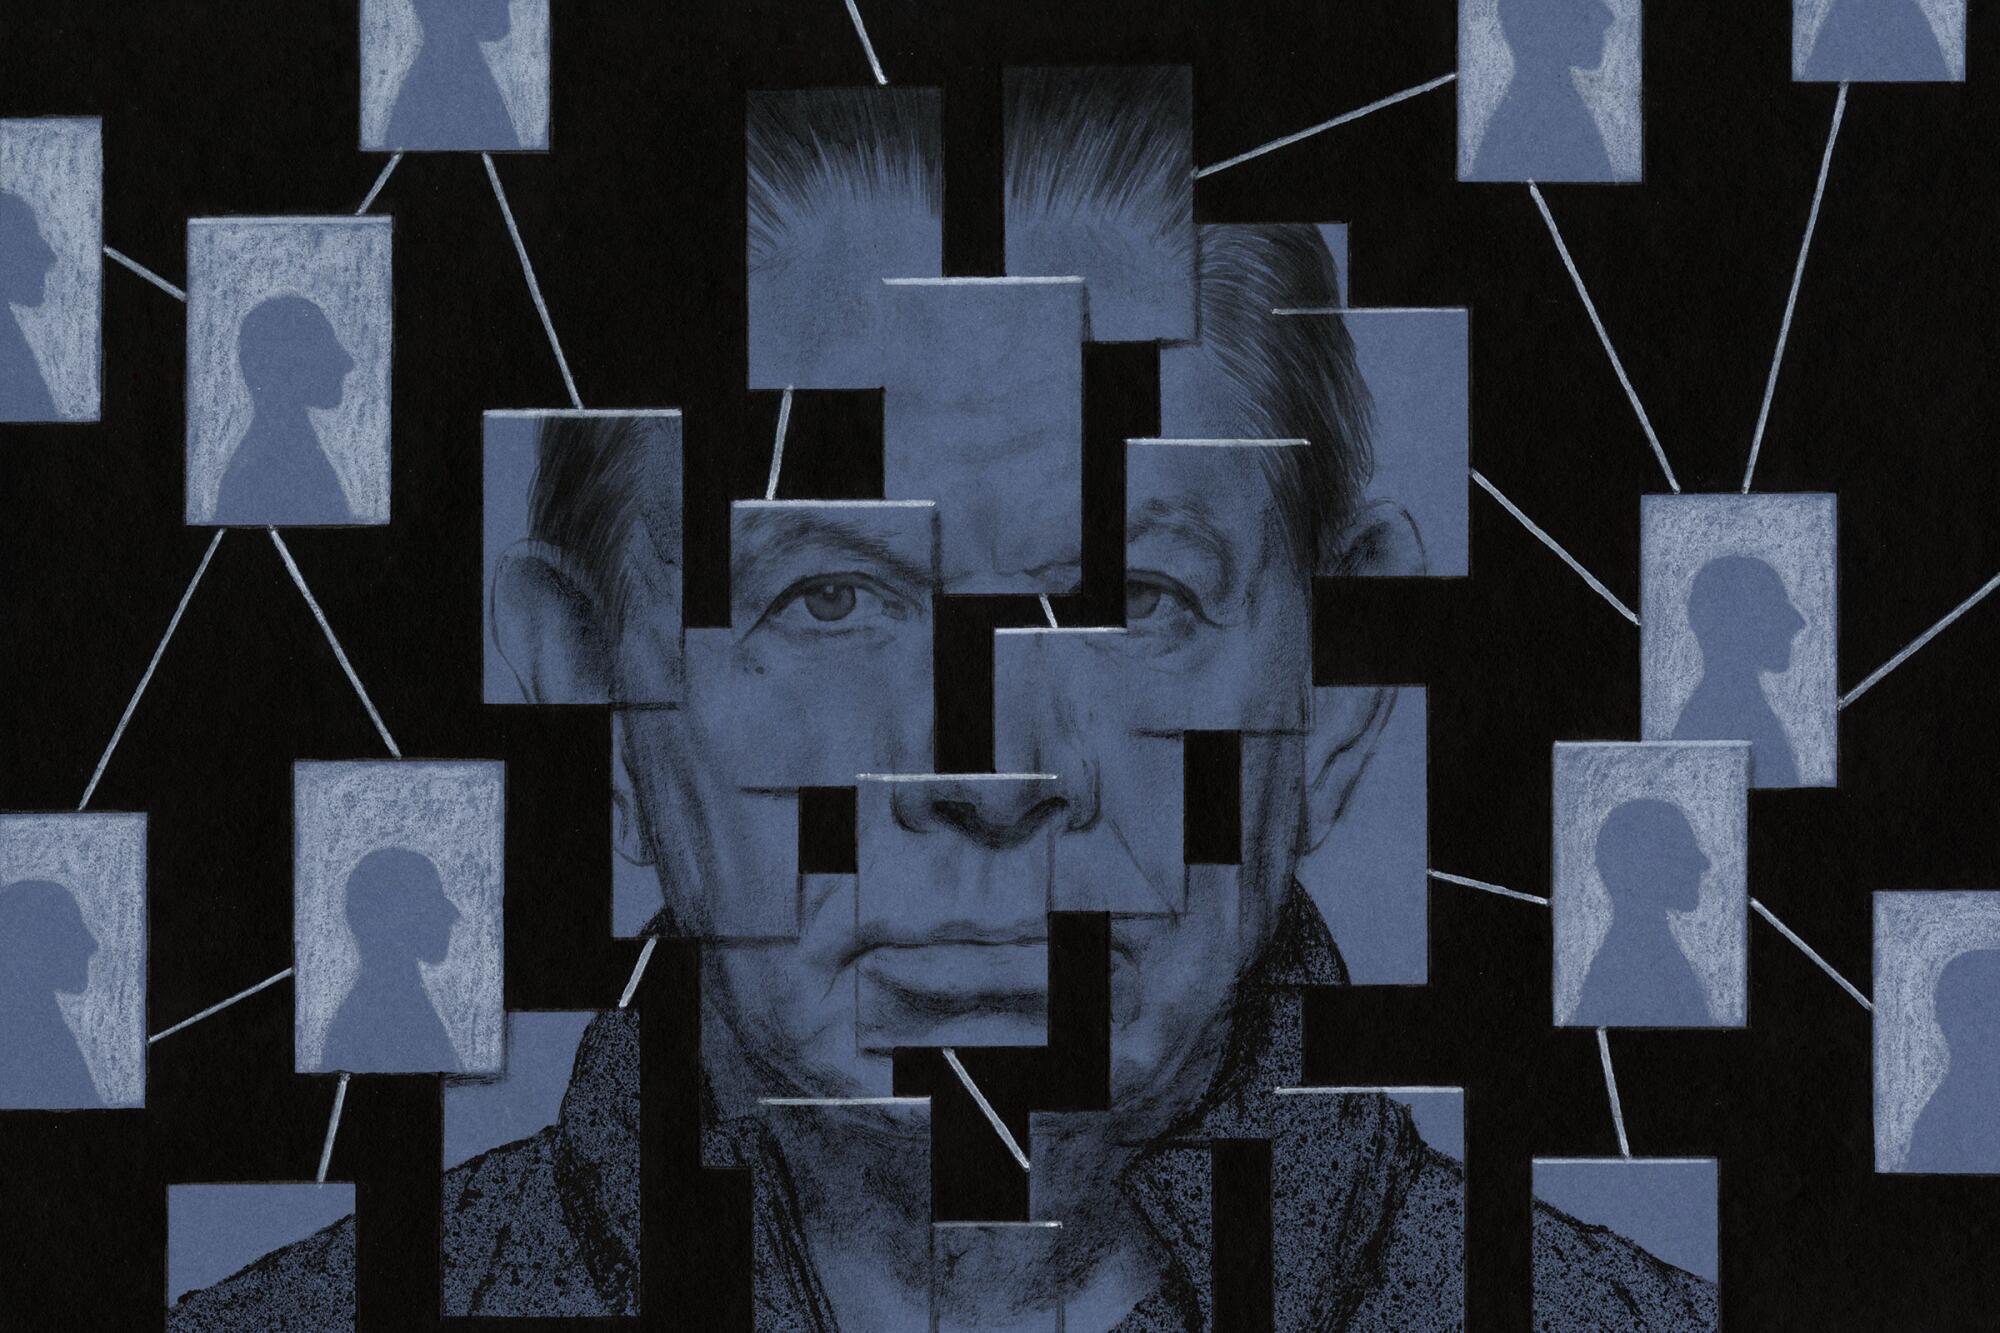 Mosaic photo of a man with floating images surrounding him